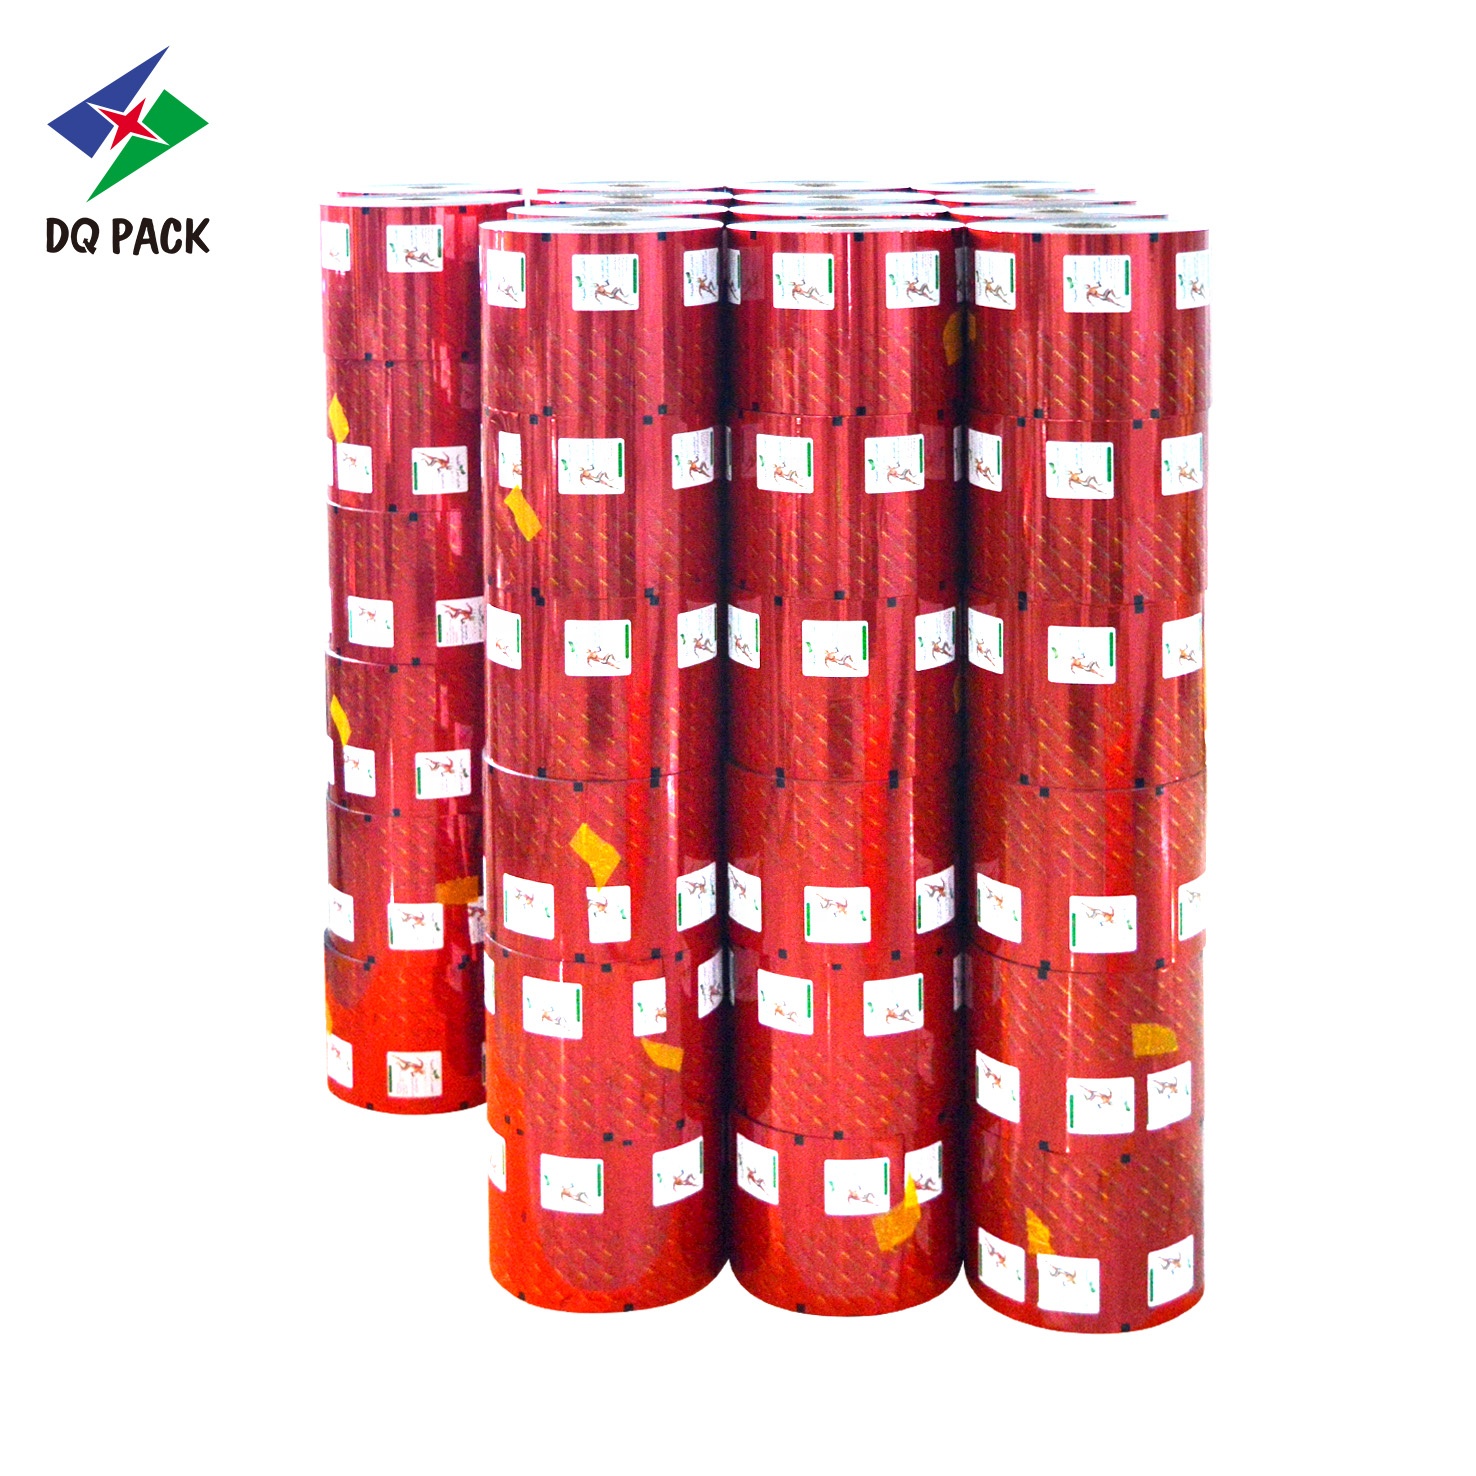 DQ PACK Customized Printing Personal Care Roll Stock Film Laminated material pet/vmpet/pe Roll Film